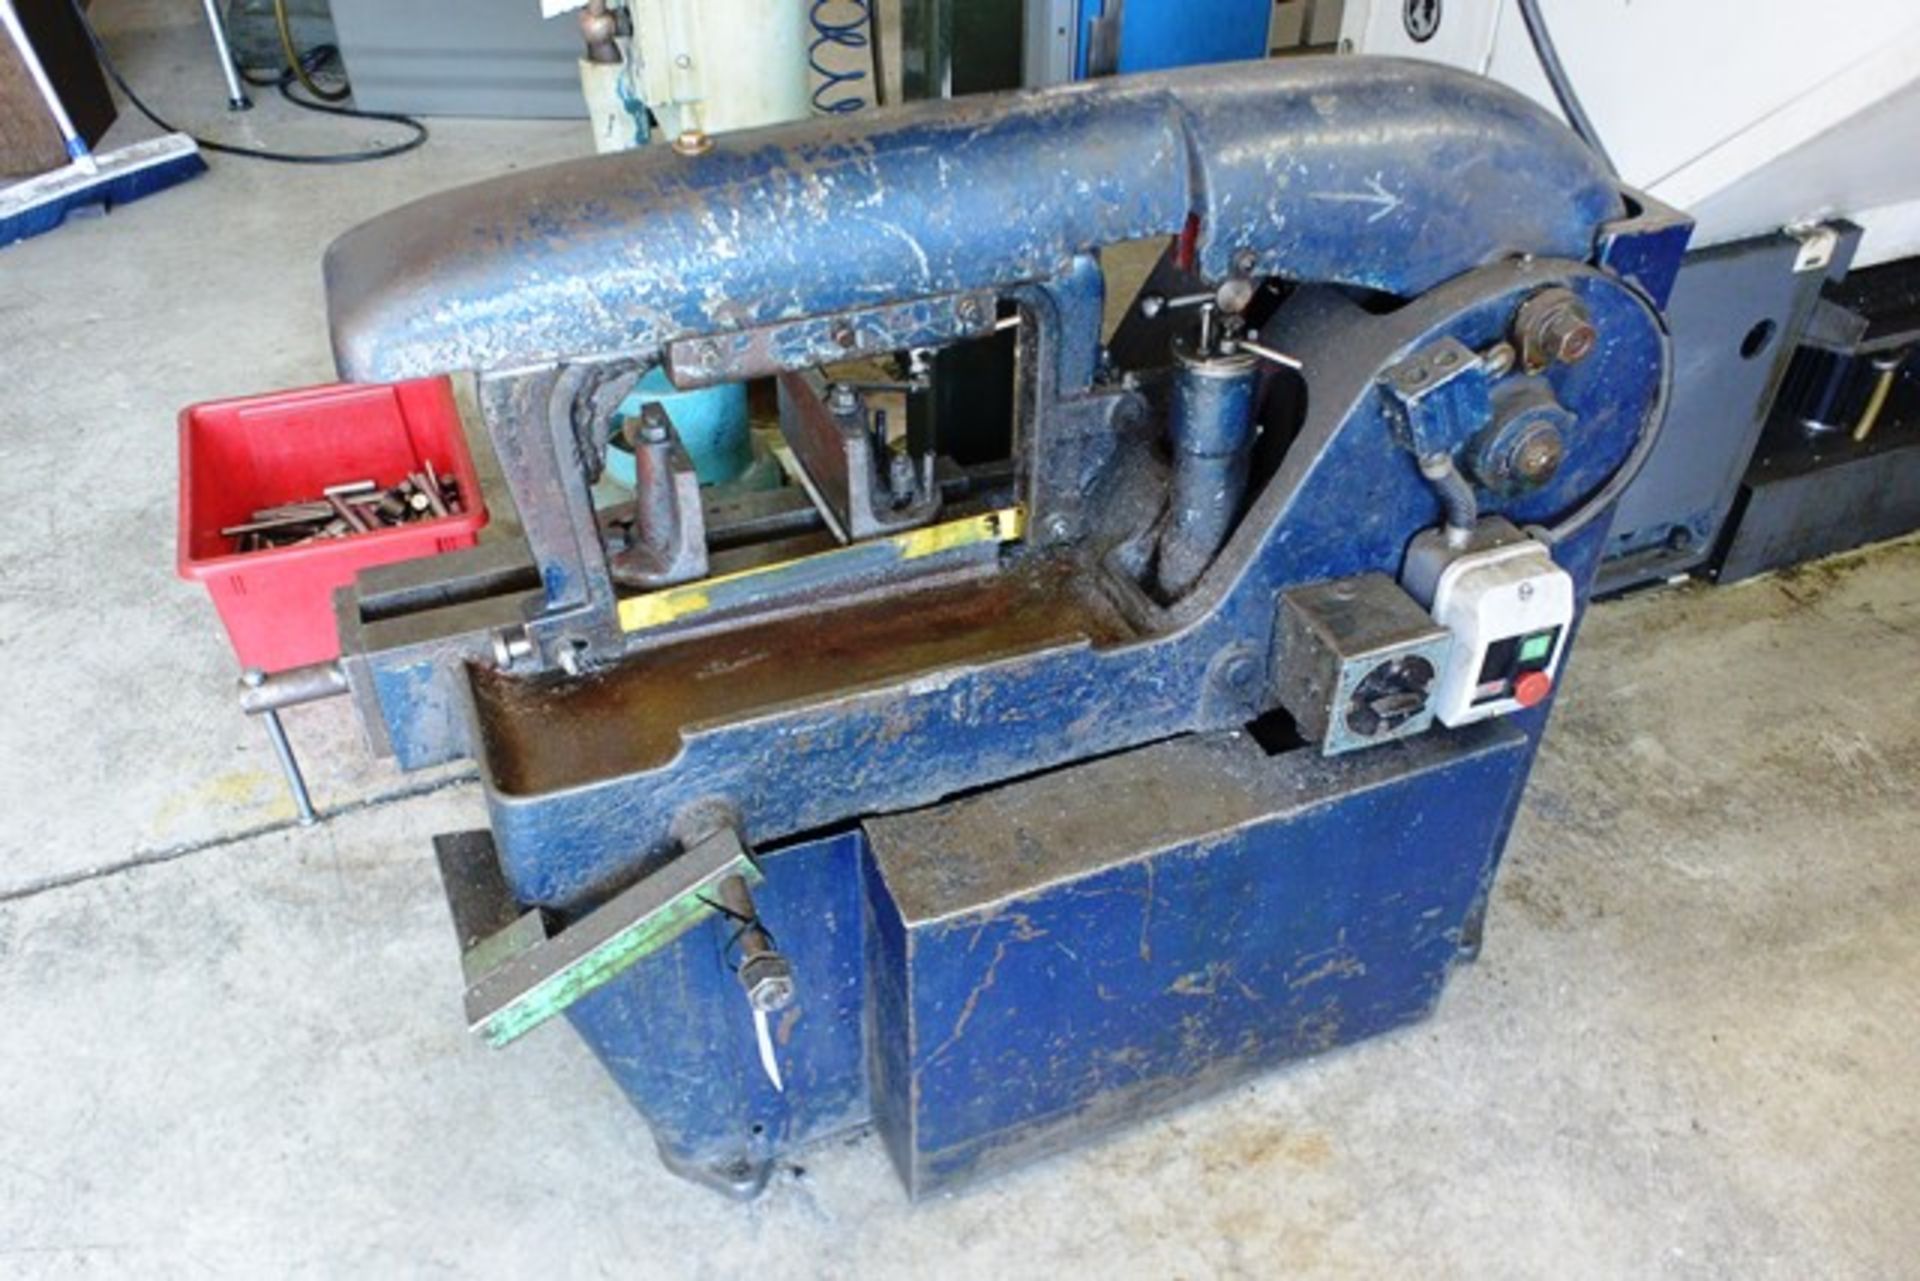 Horizontal bandsaw (3 phase) (NB: this item has no CE marking. The Purchaser is required to